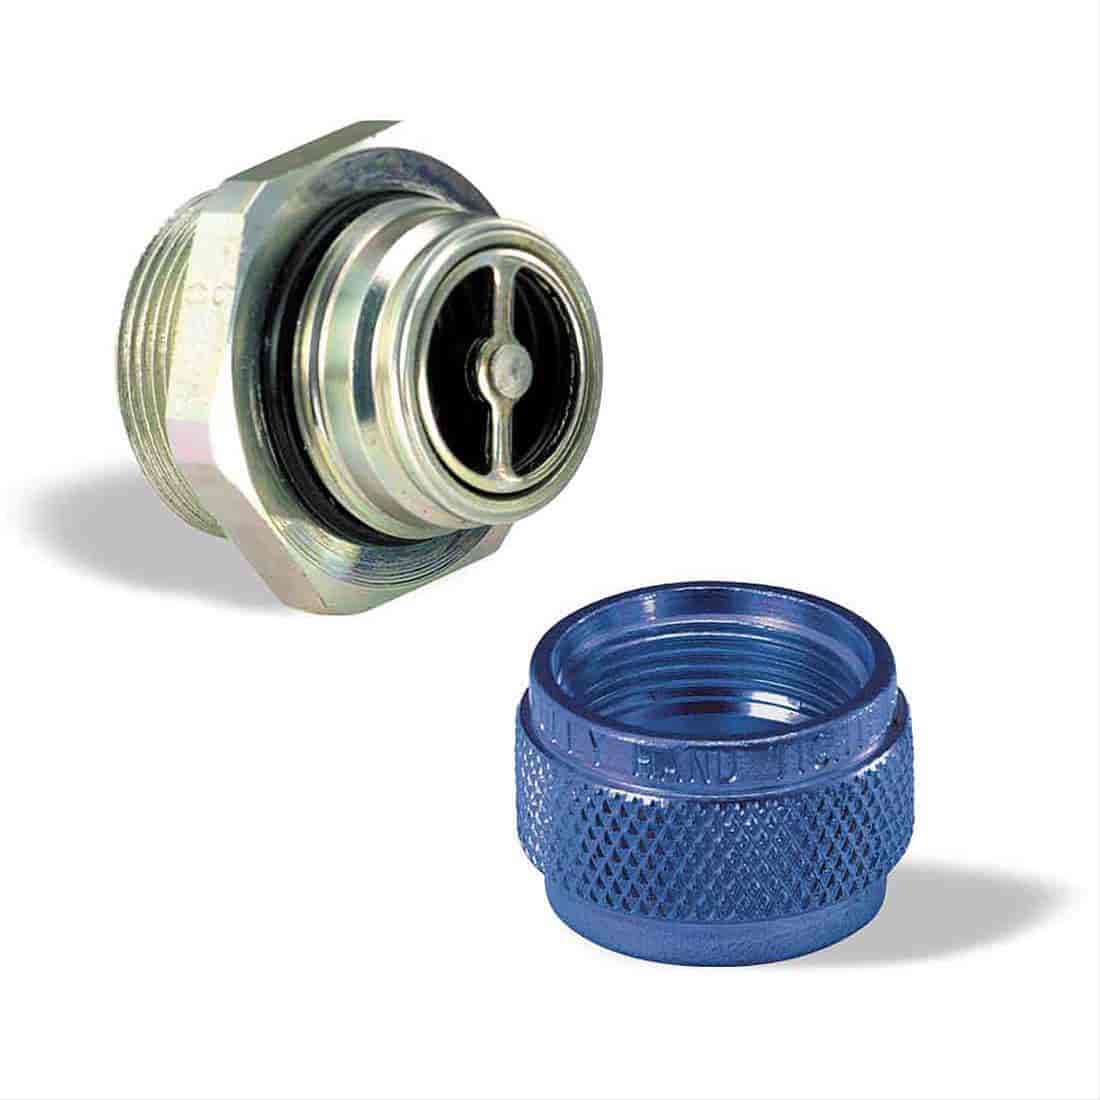 Male Half M14 x 1.25 Thread Size 1.52in.x.96in. 1-1/16in. Hex Size - Quick-Drain Oil Pan Coupling